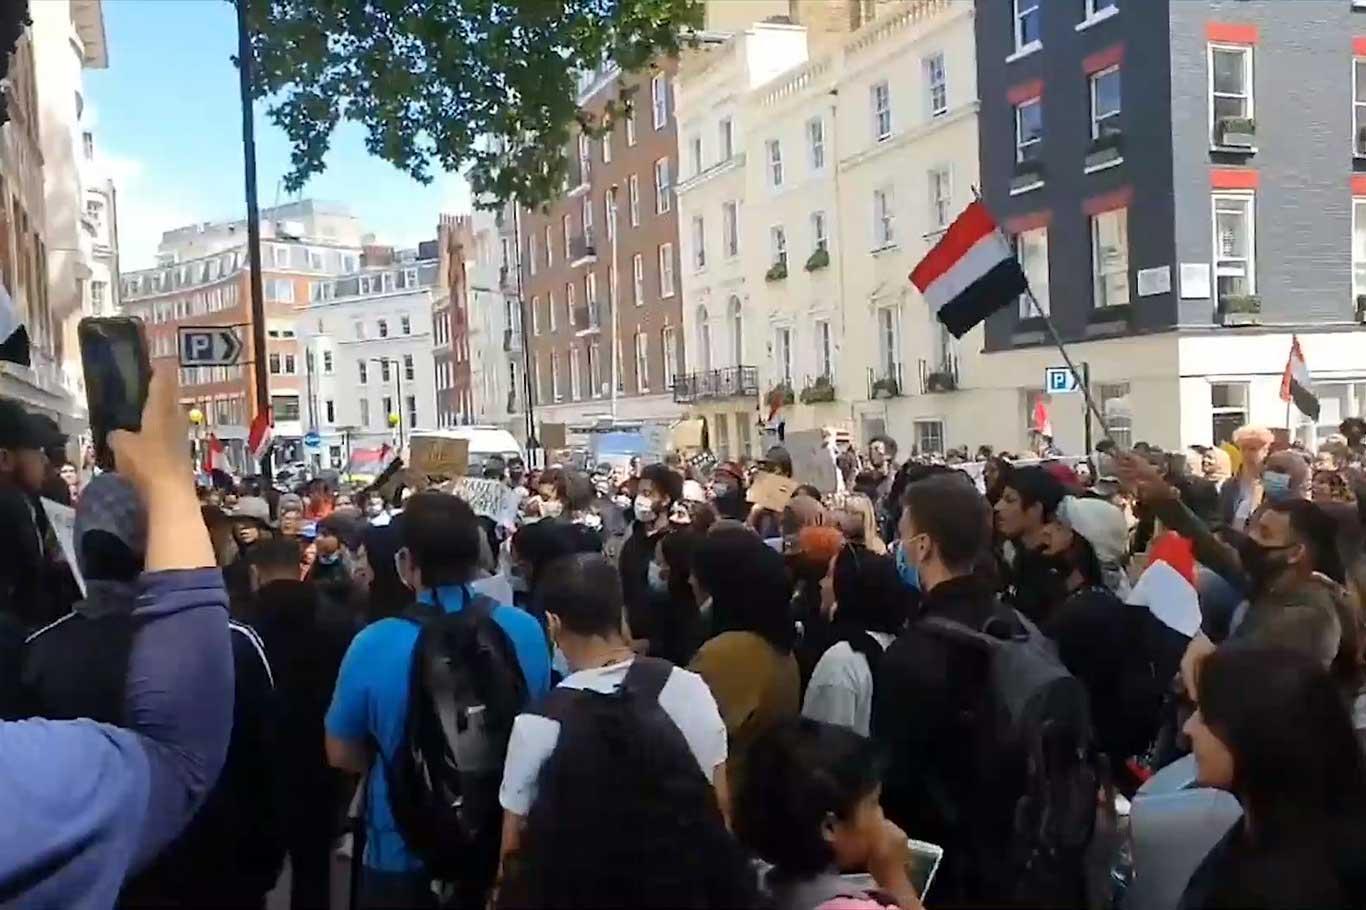 Yemen protest at the BBC building in central London